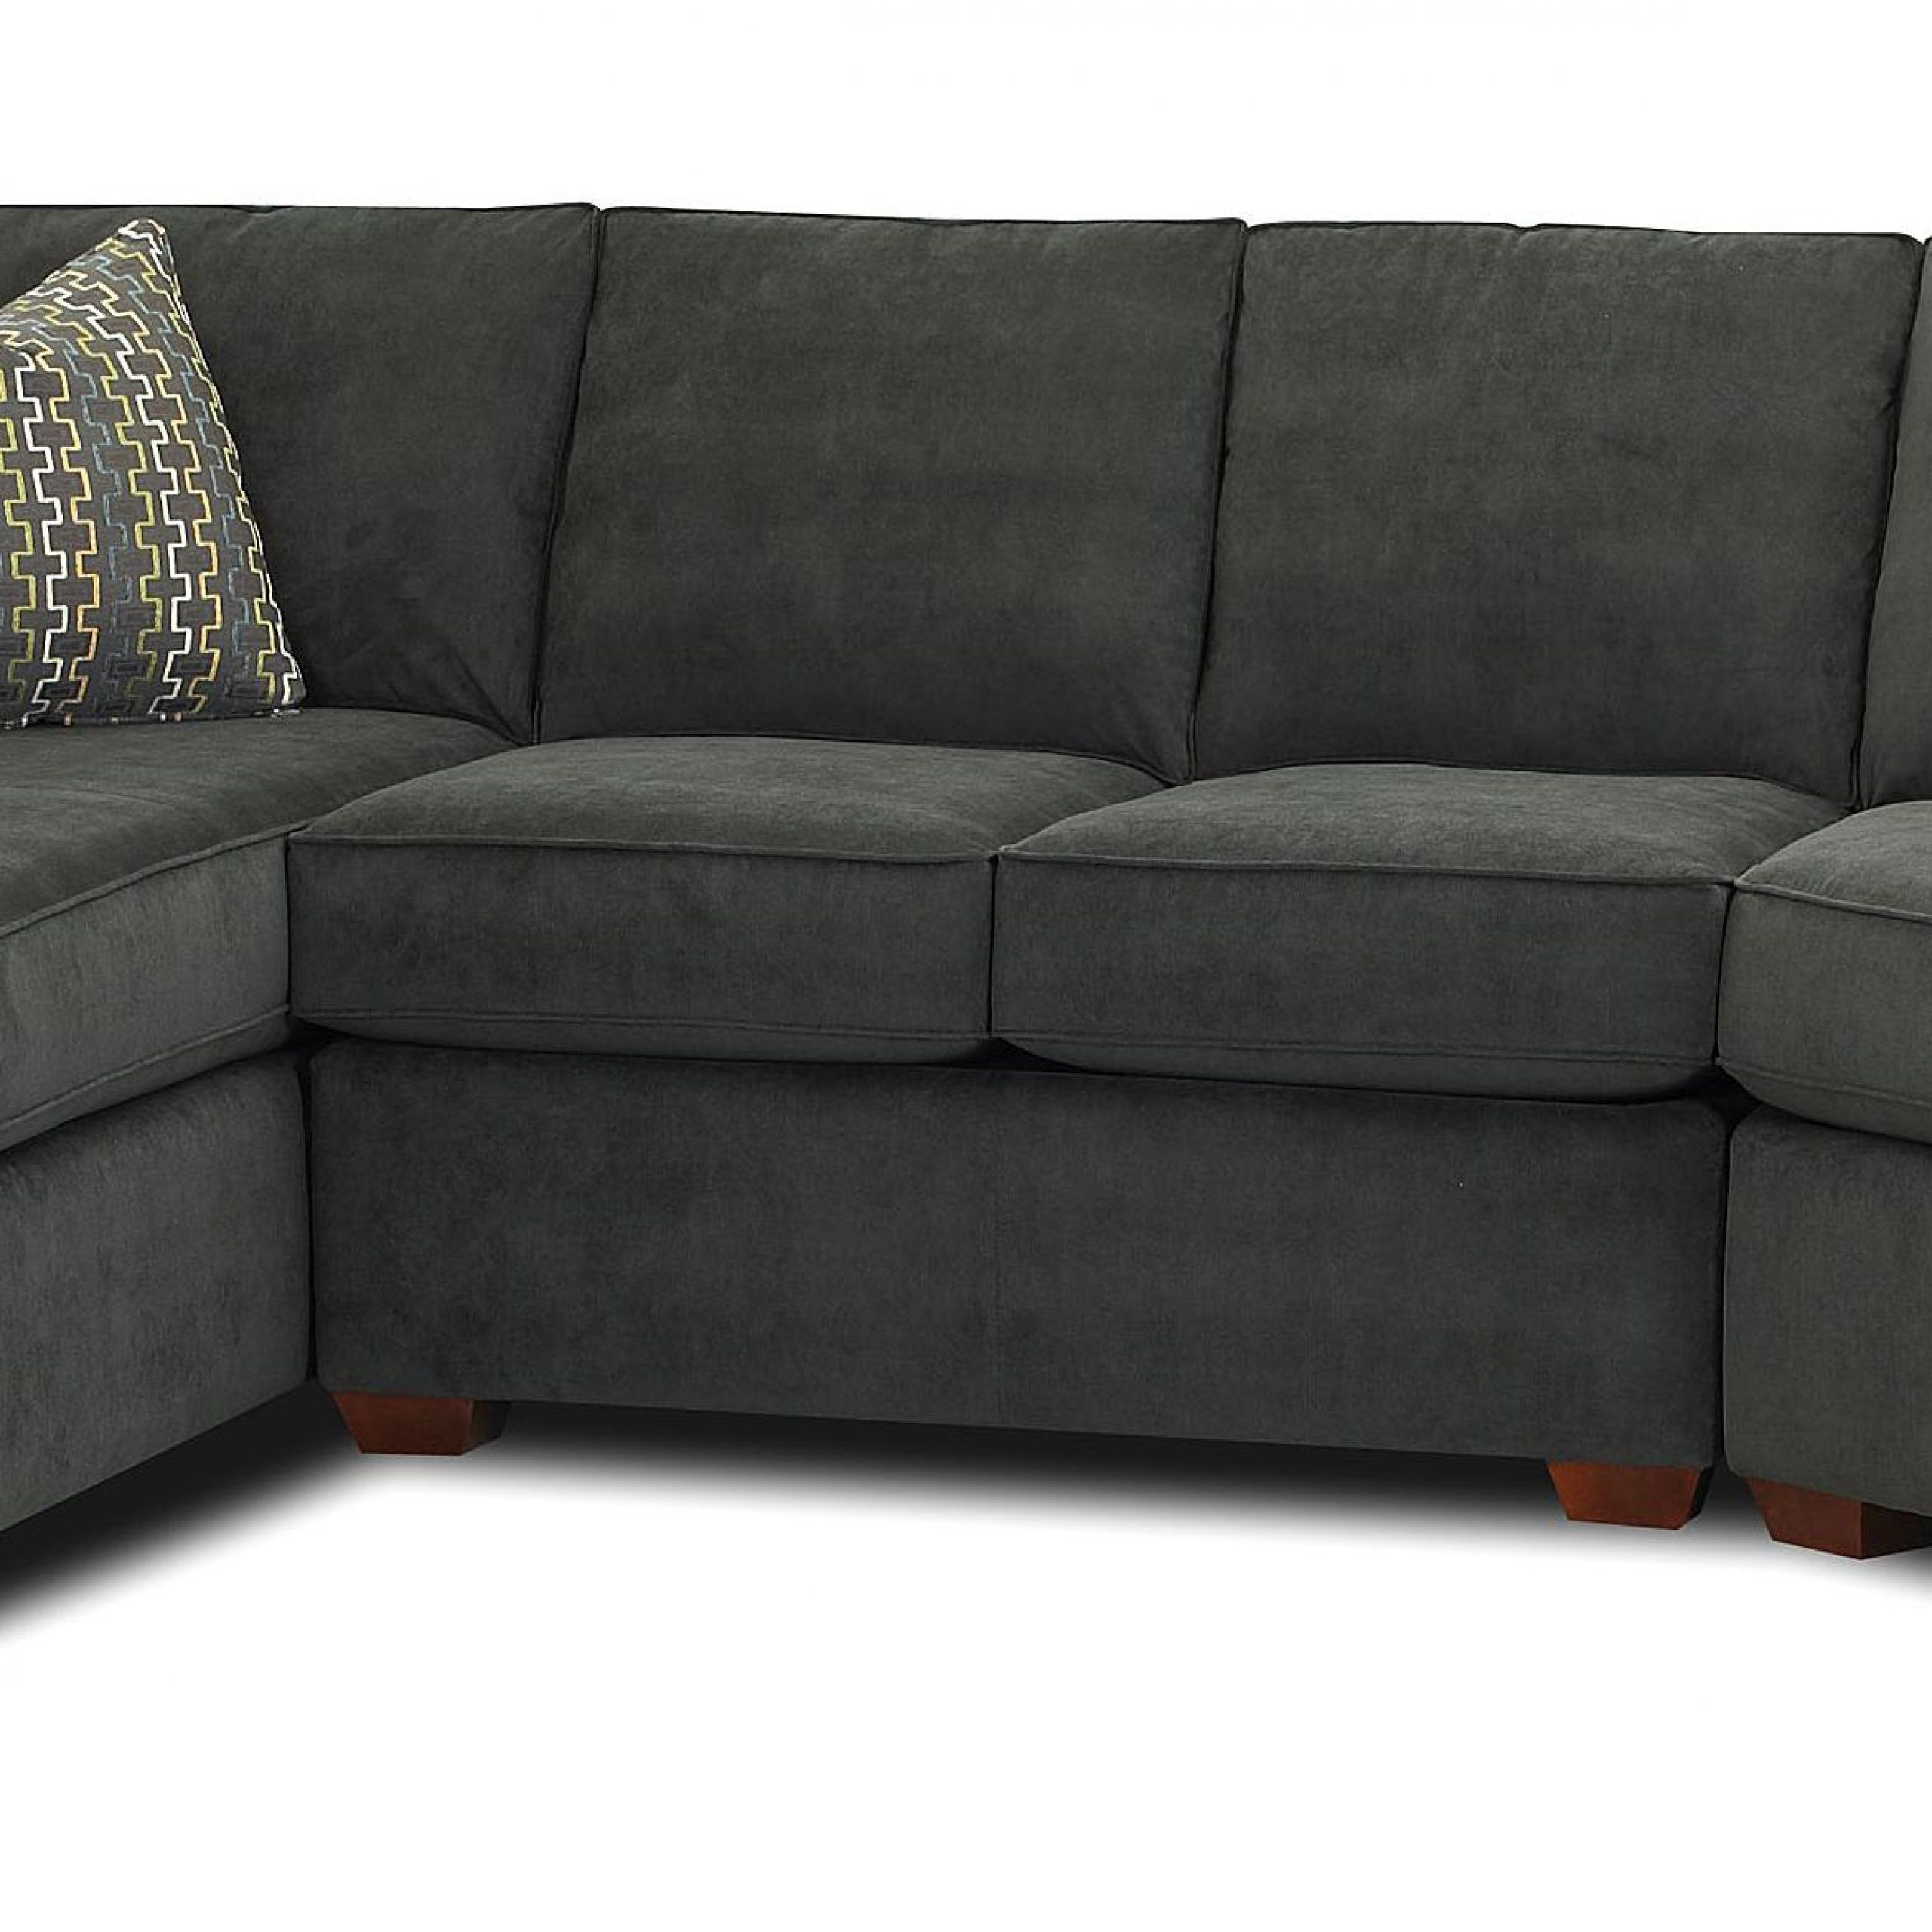 Klaussner Hybrid Sectional Sofa With Left Facing Sofa For Hannah Left Sectional Sofas (View 4 of 15)